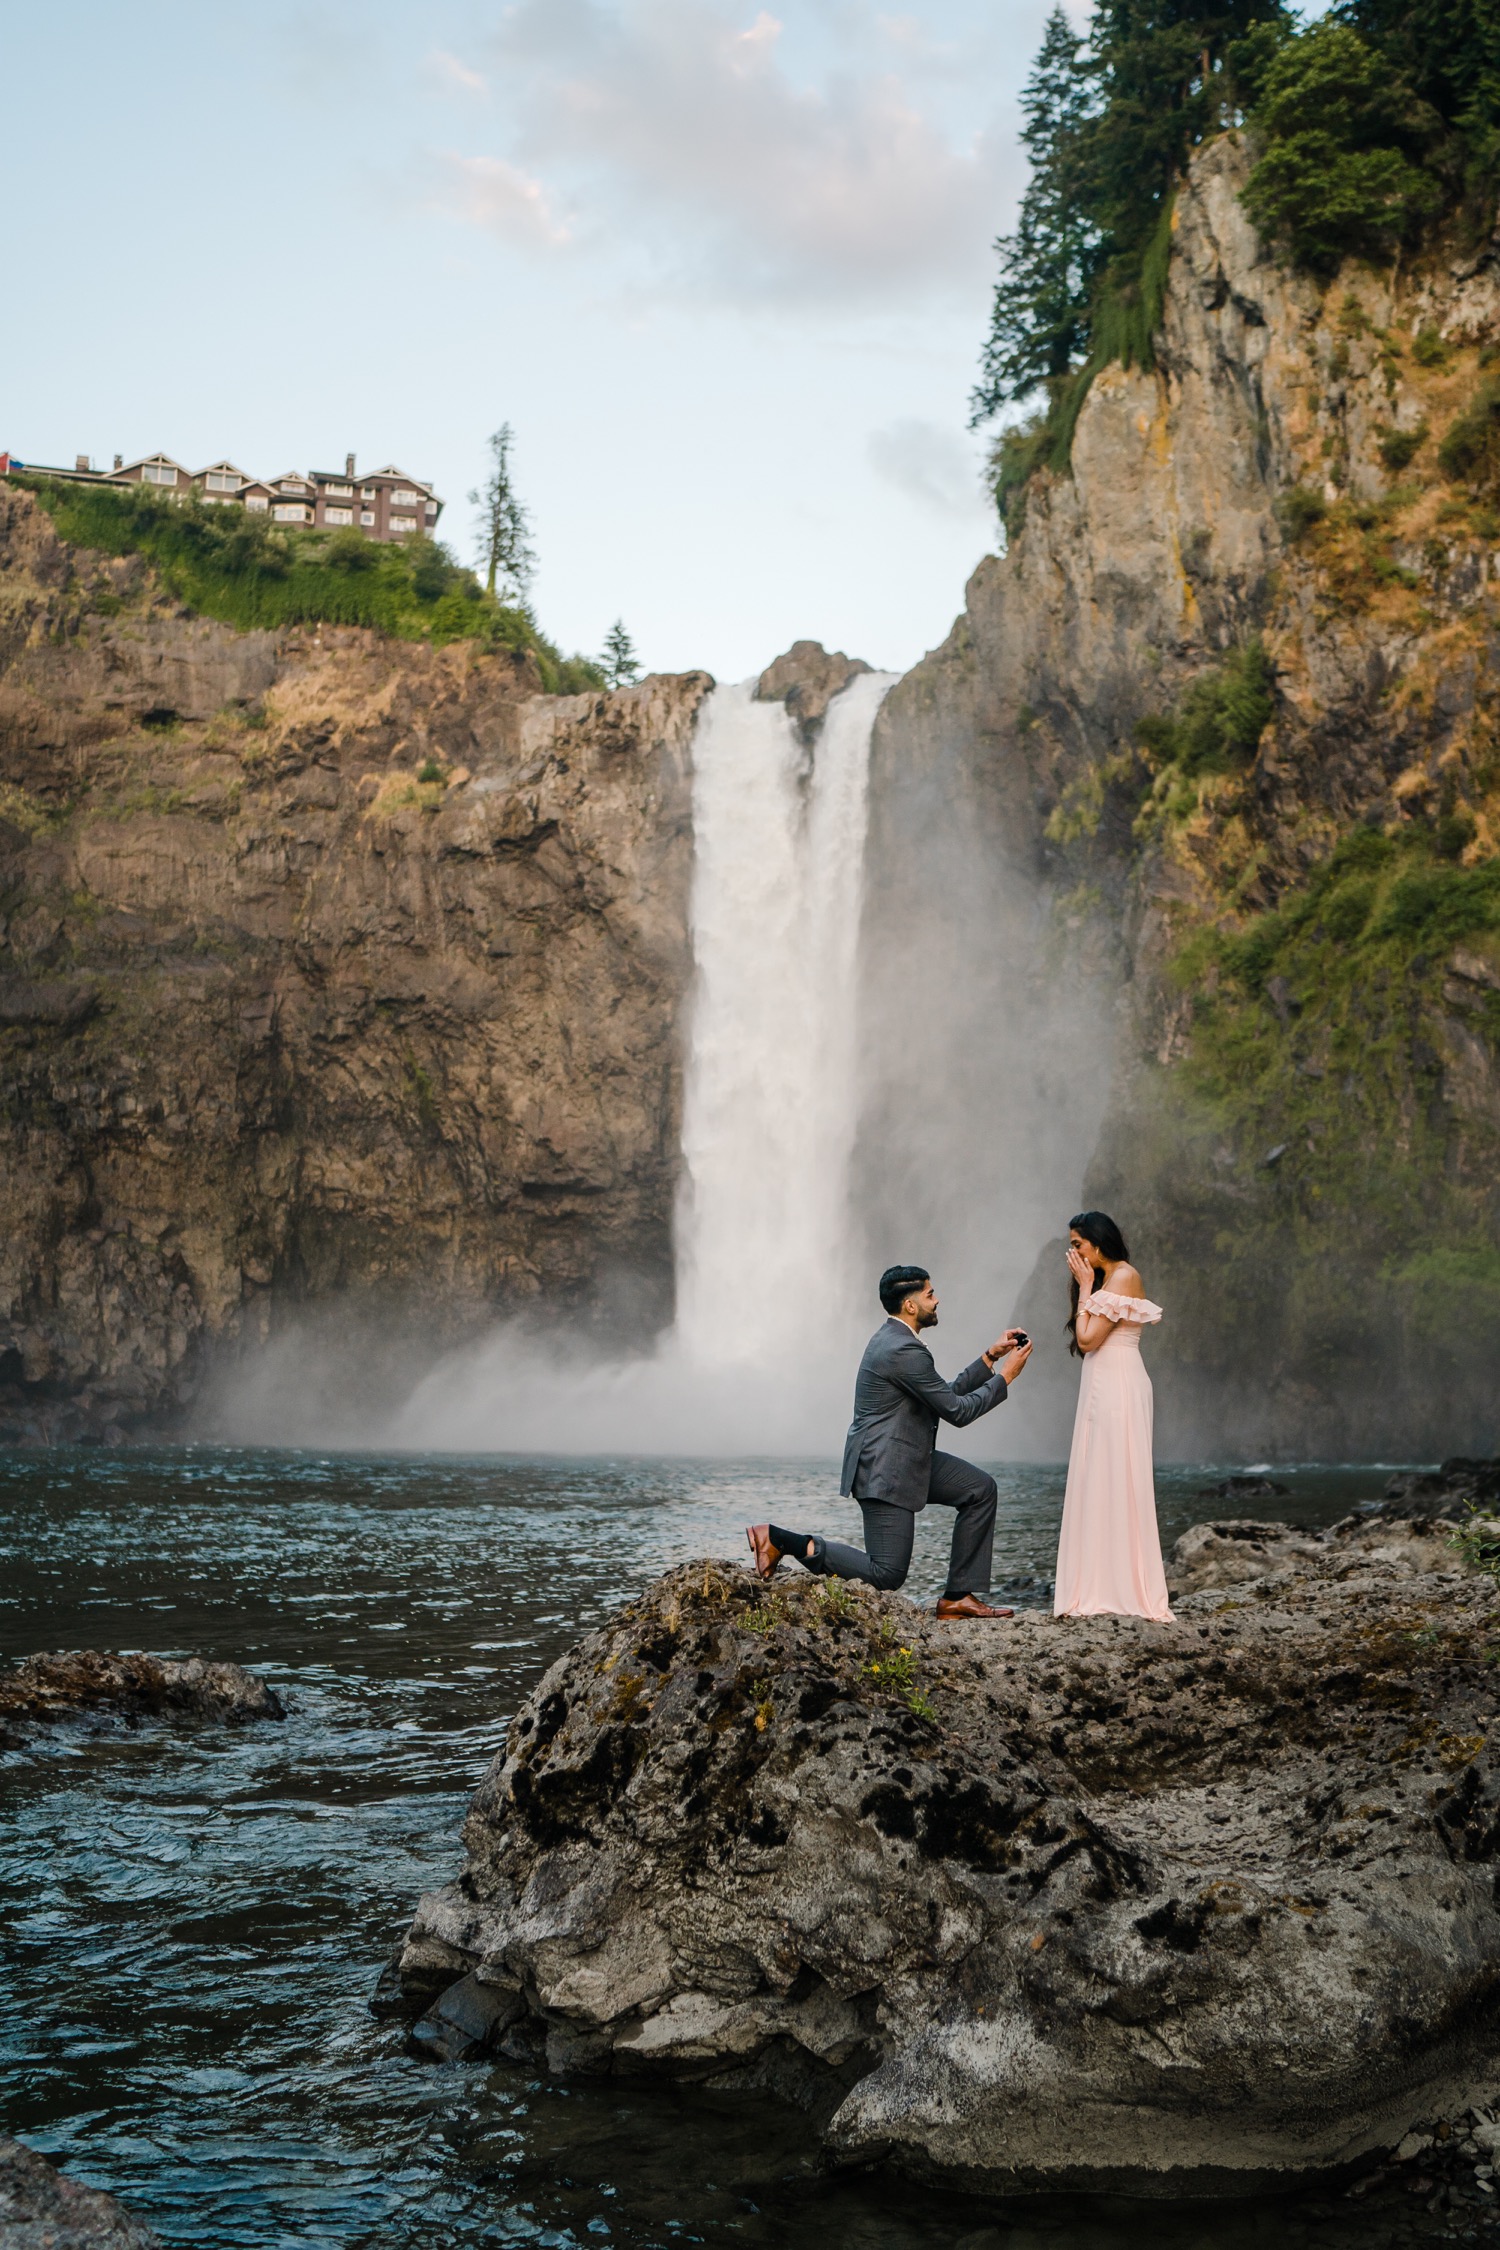 Man proposes to woman with Snoqualmie Falls in the background during surprise proposal session